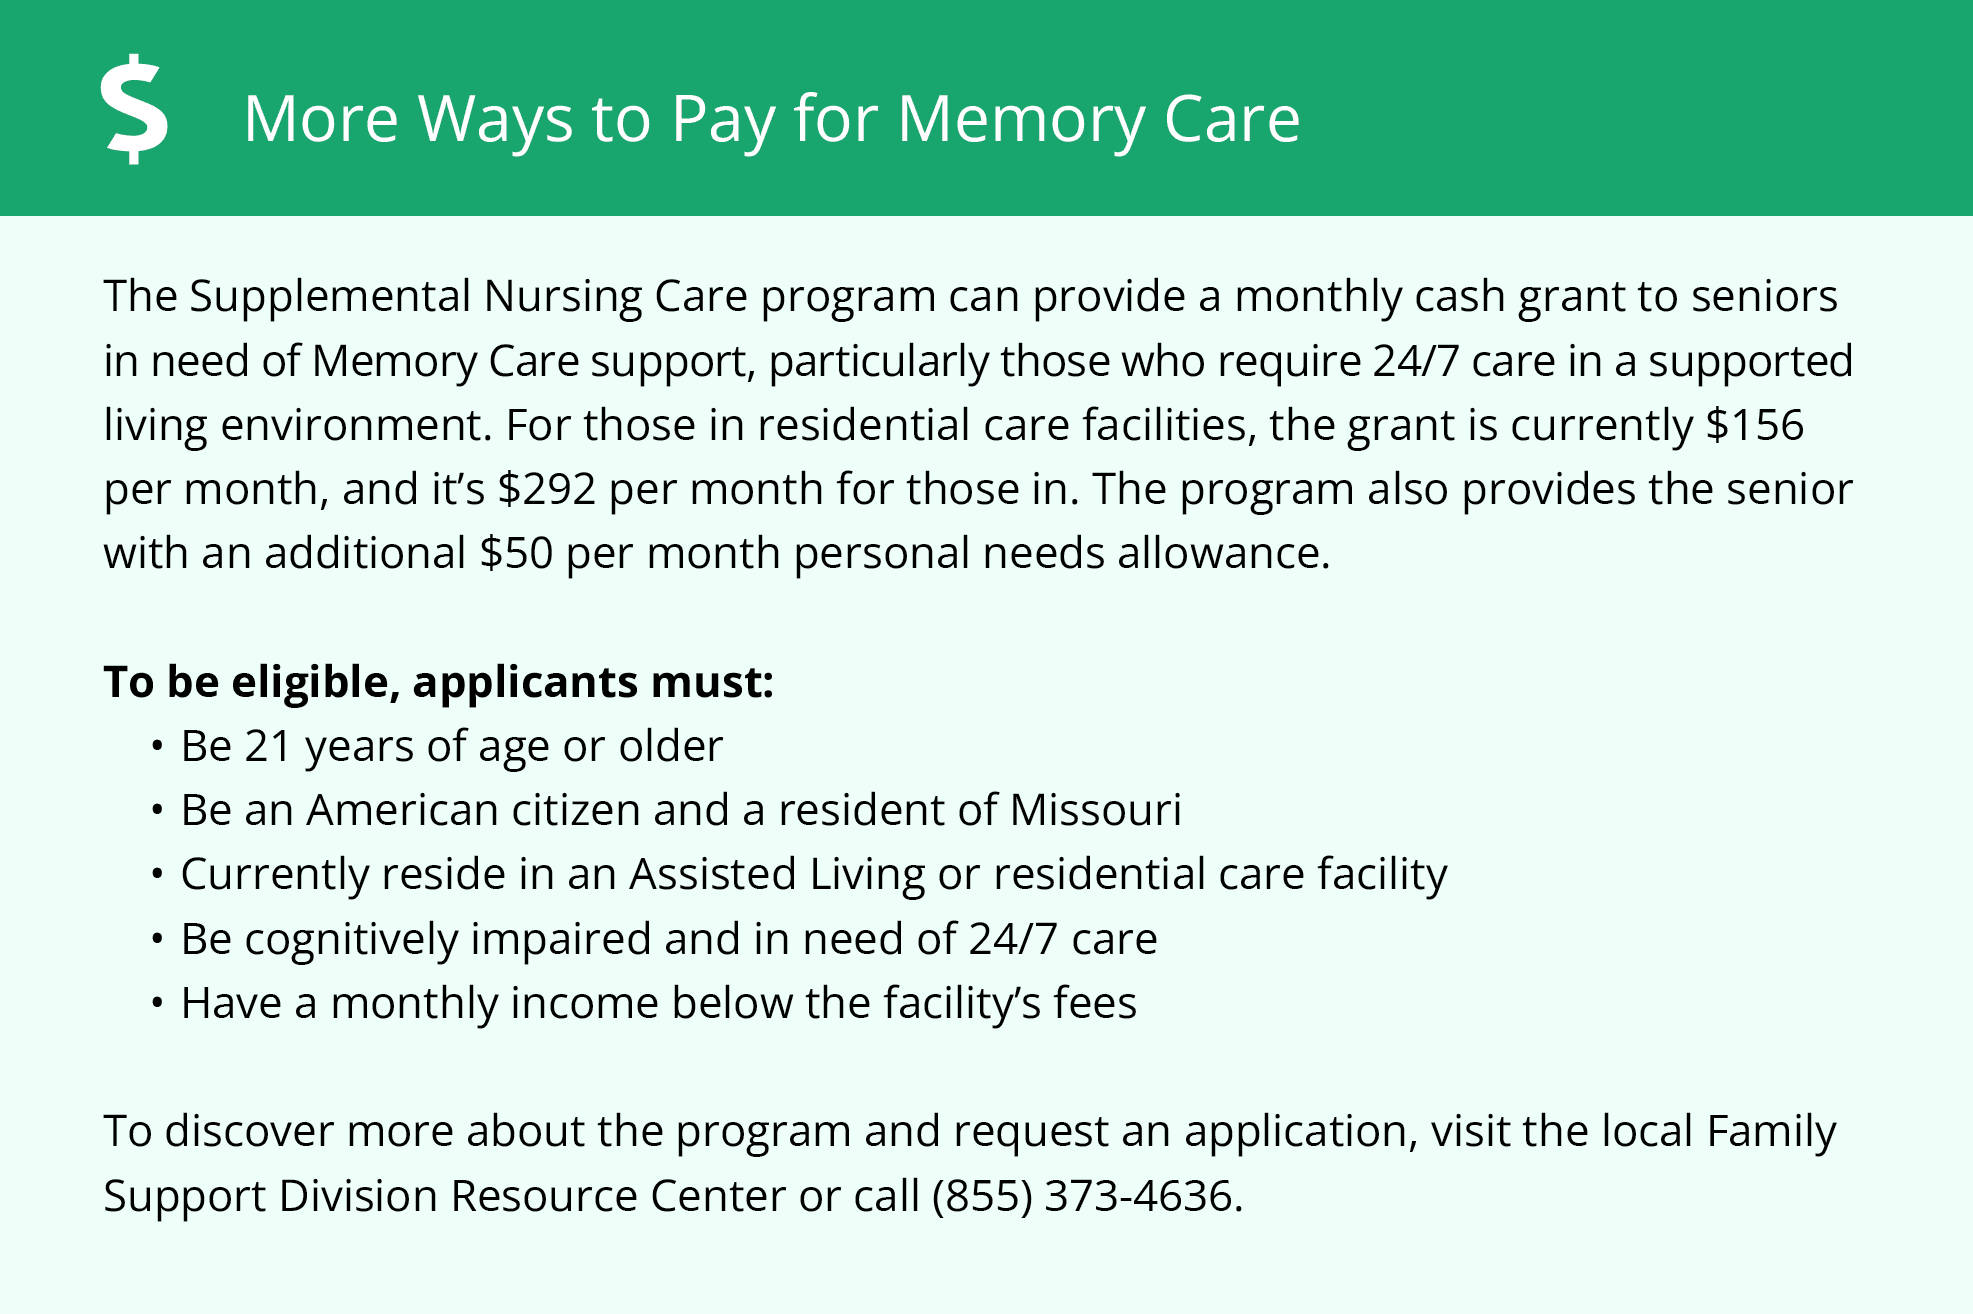 Financial Assistance for Memory Care in Missouri